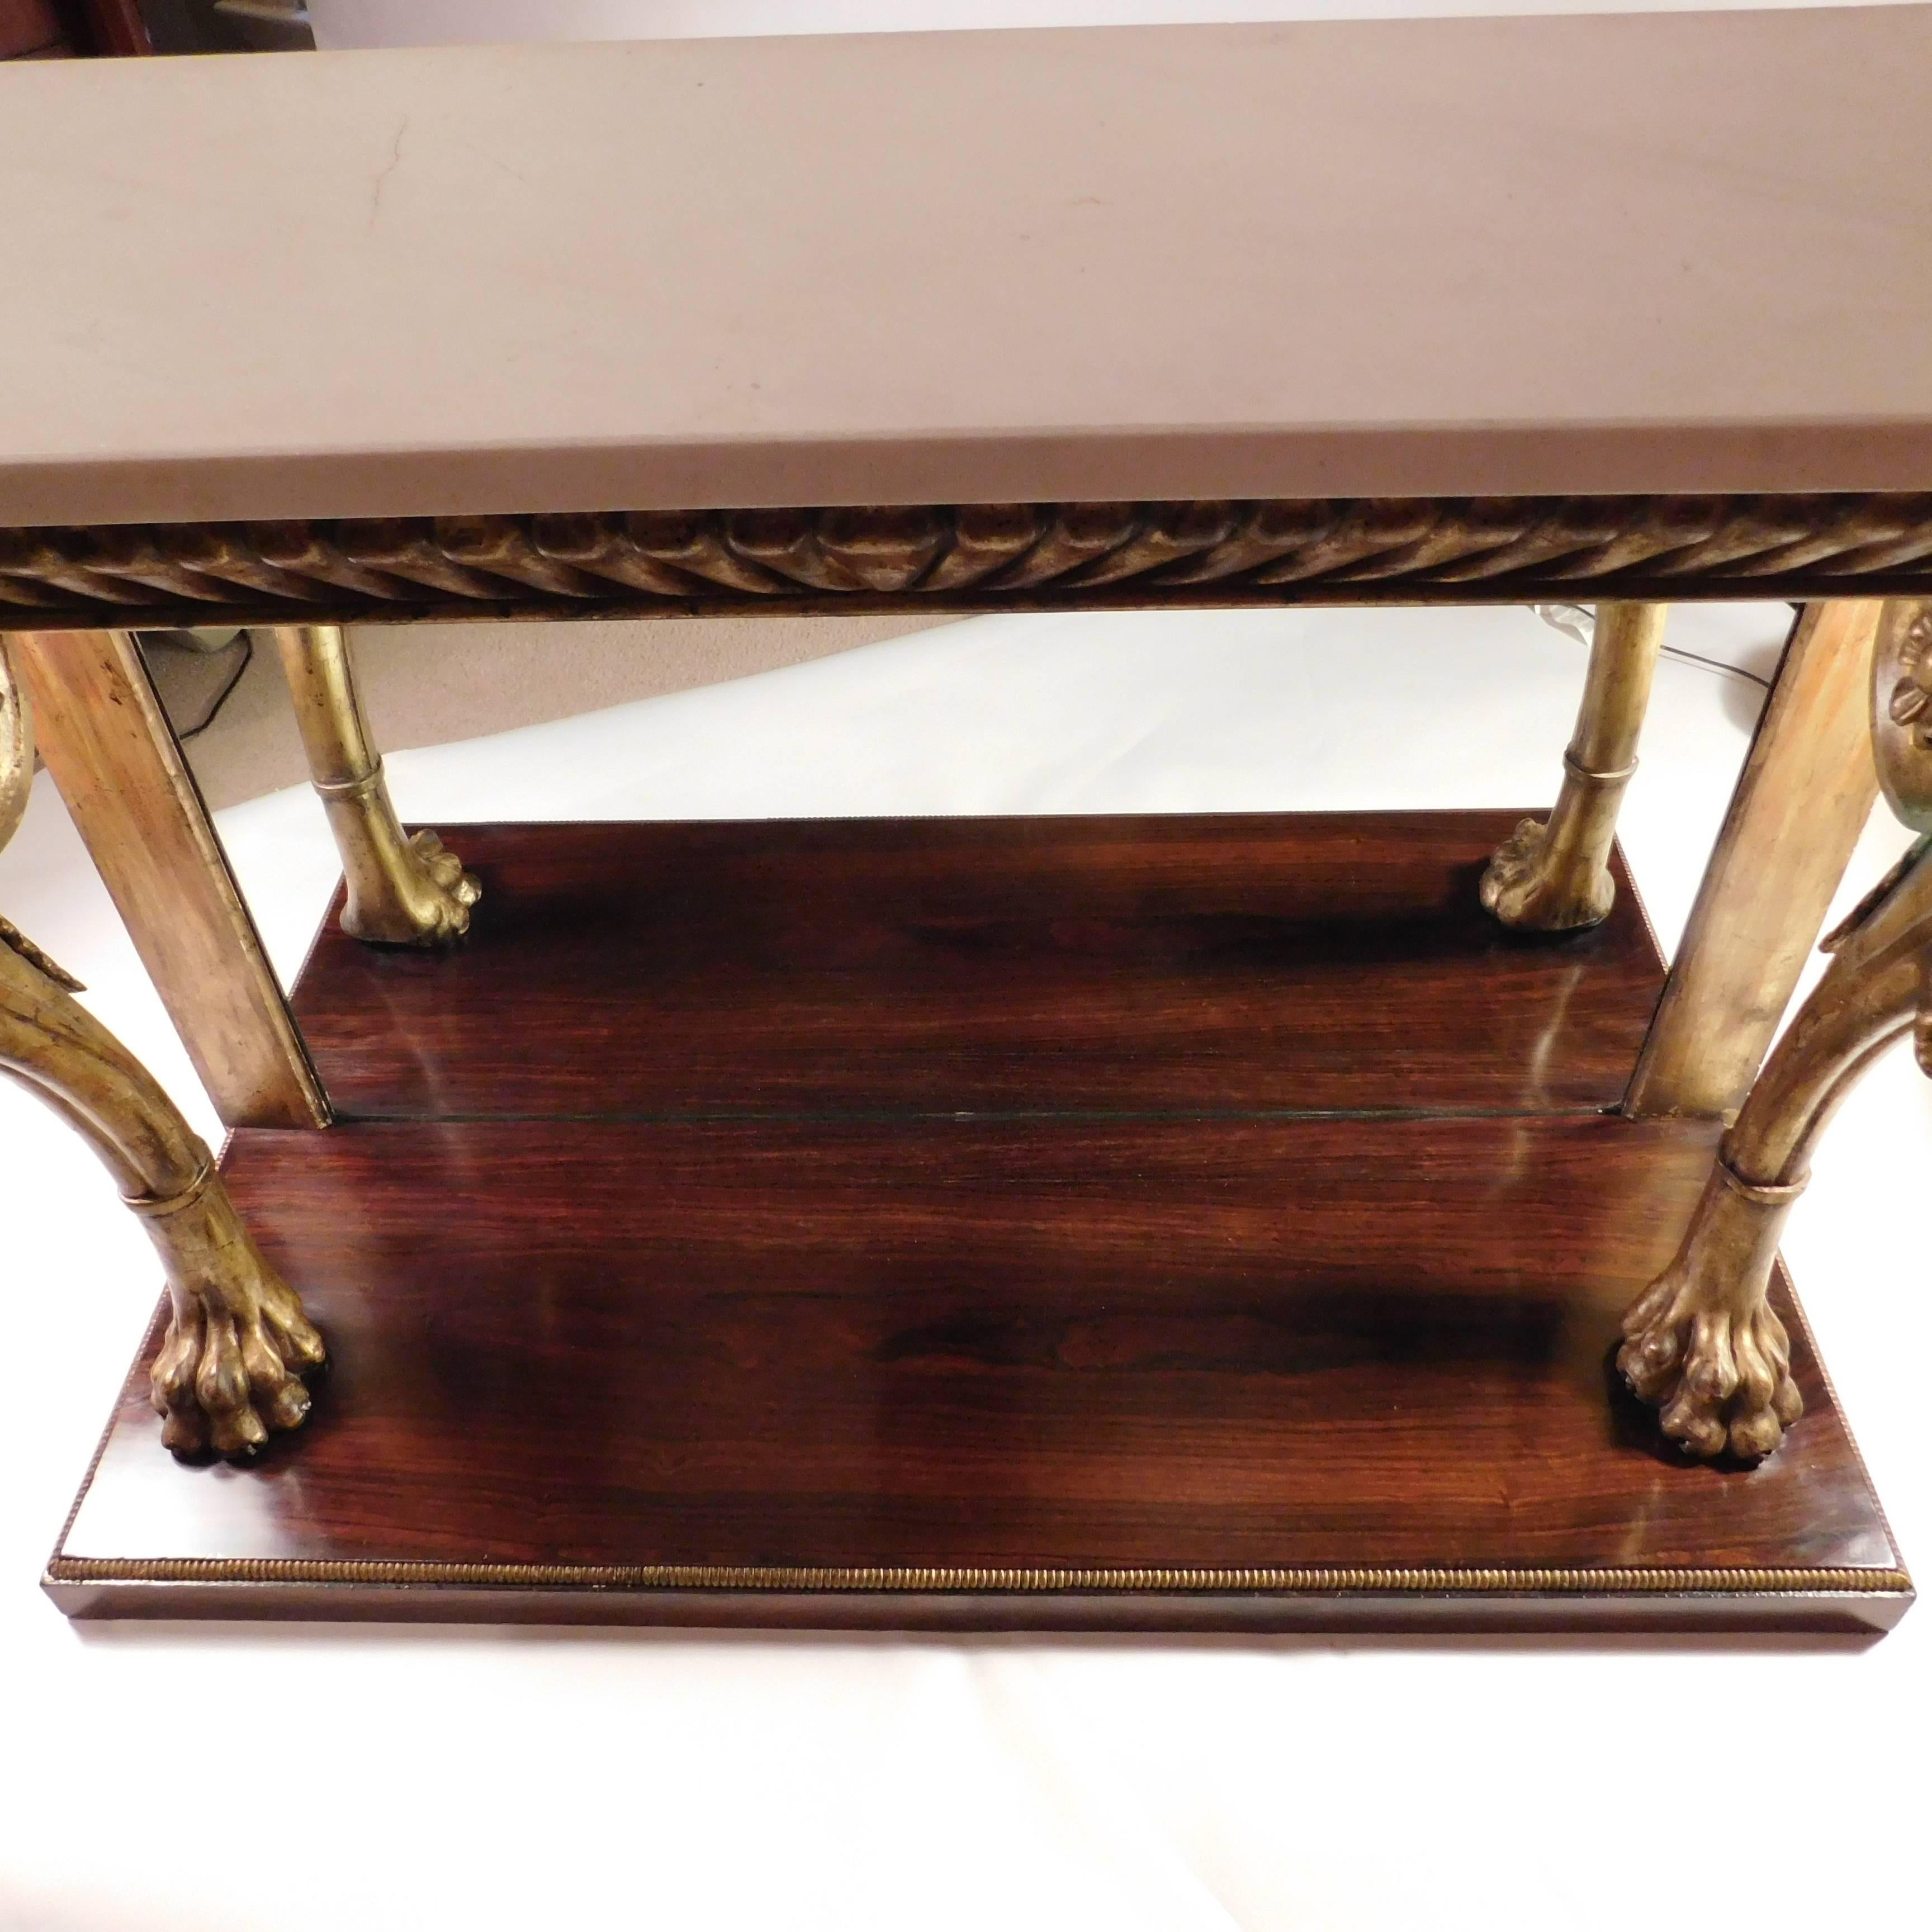 This oversize pier table or console is gilt and paint on hand-carved wood with a white marble top and a mirrored back. Top supported by gracefully scrolled and curved legs above lion's paw feet. Gadrooned border around the top skirt and, in smaller